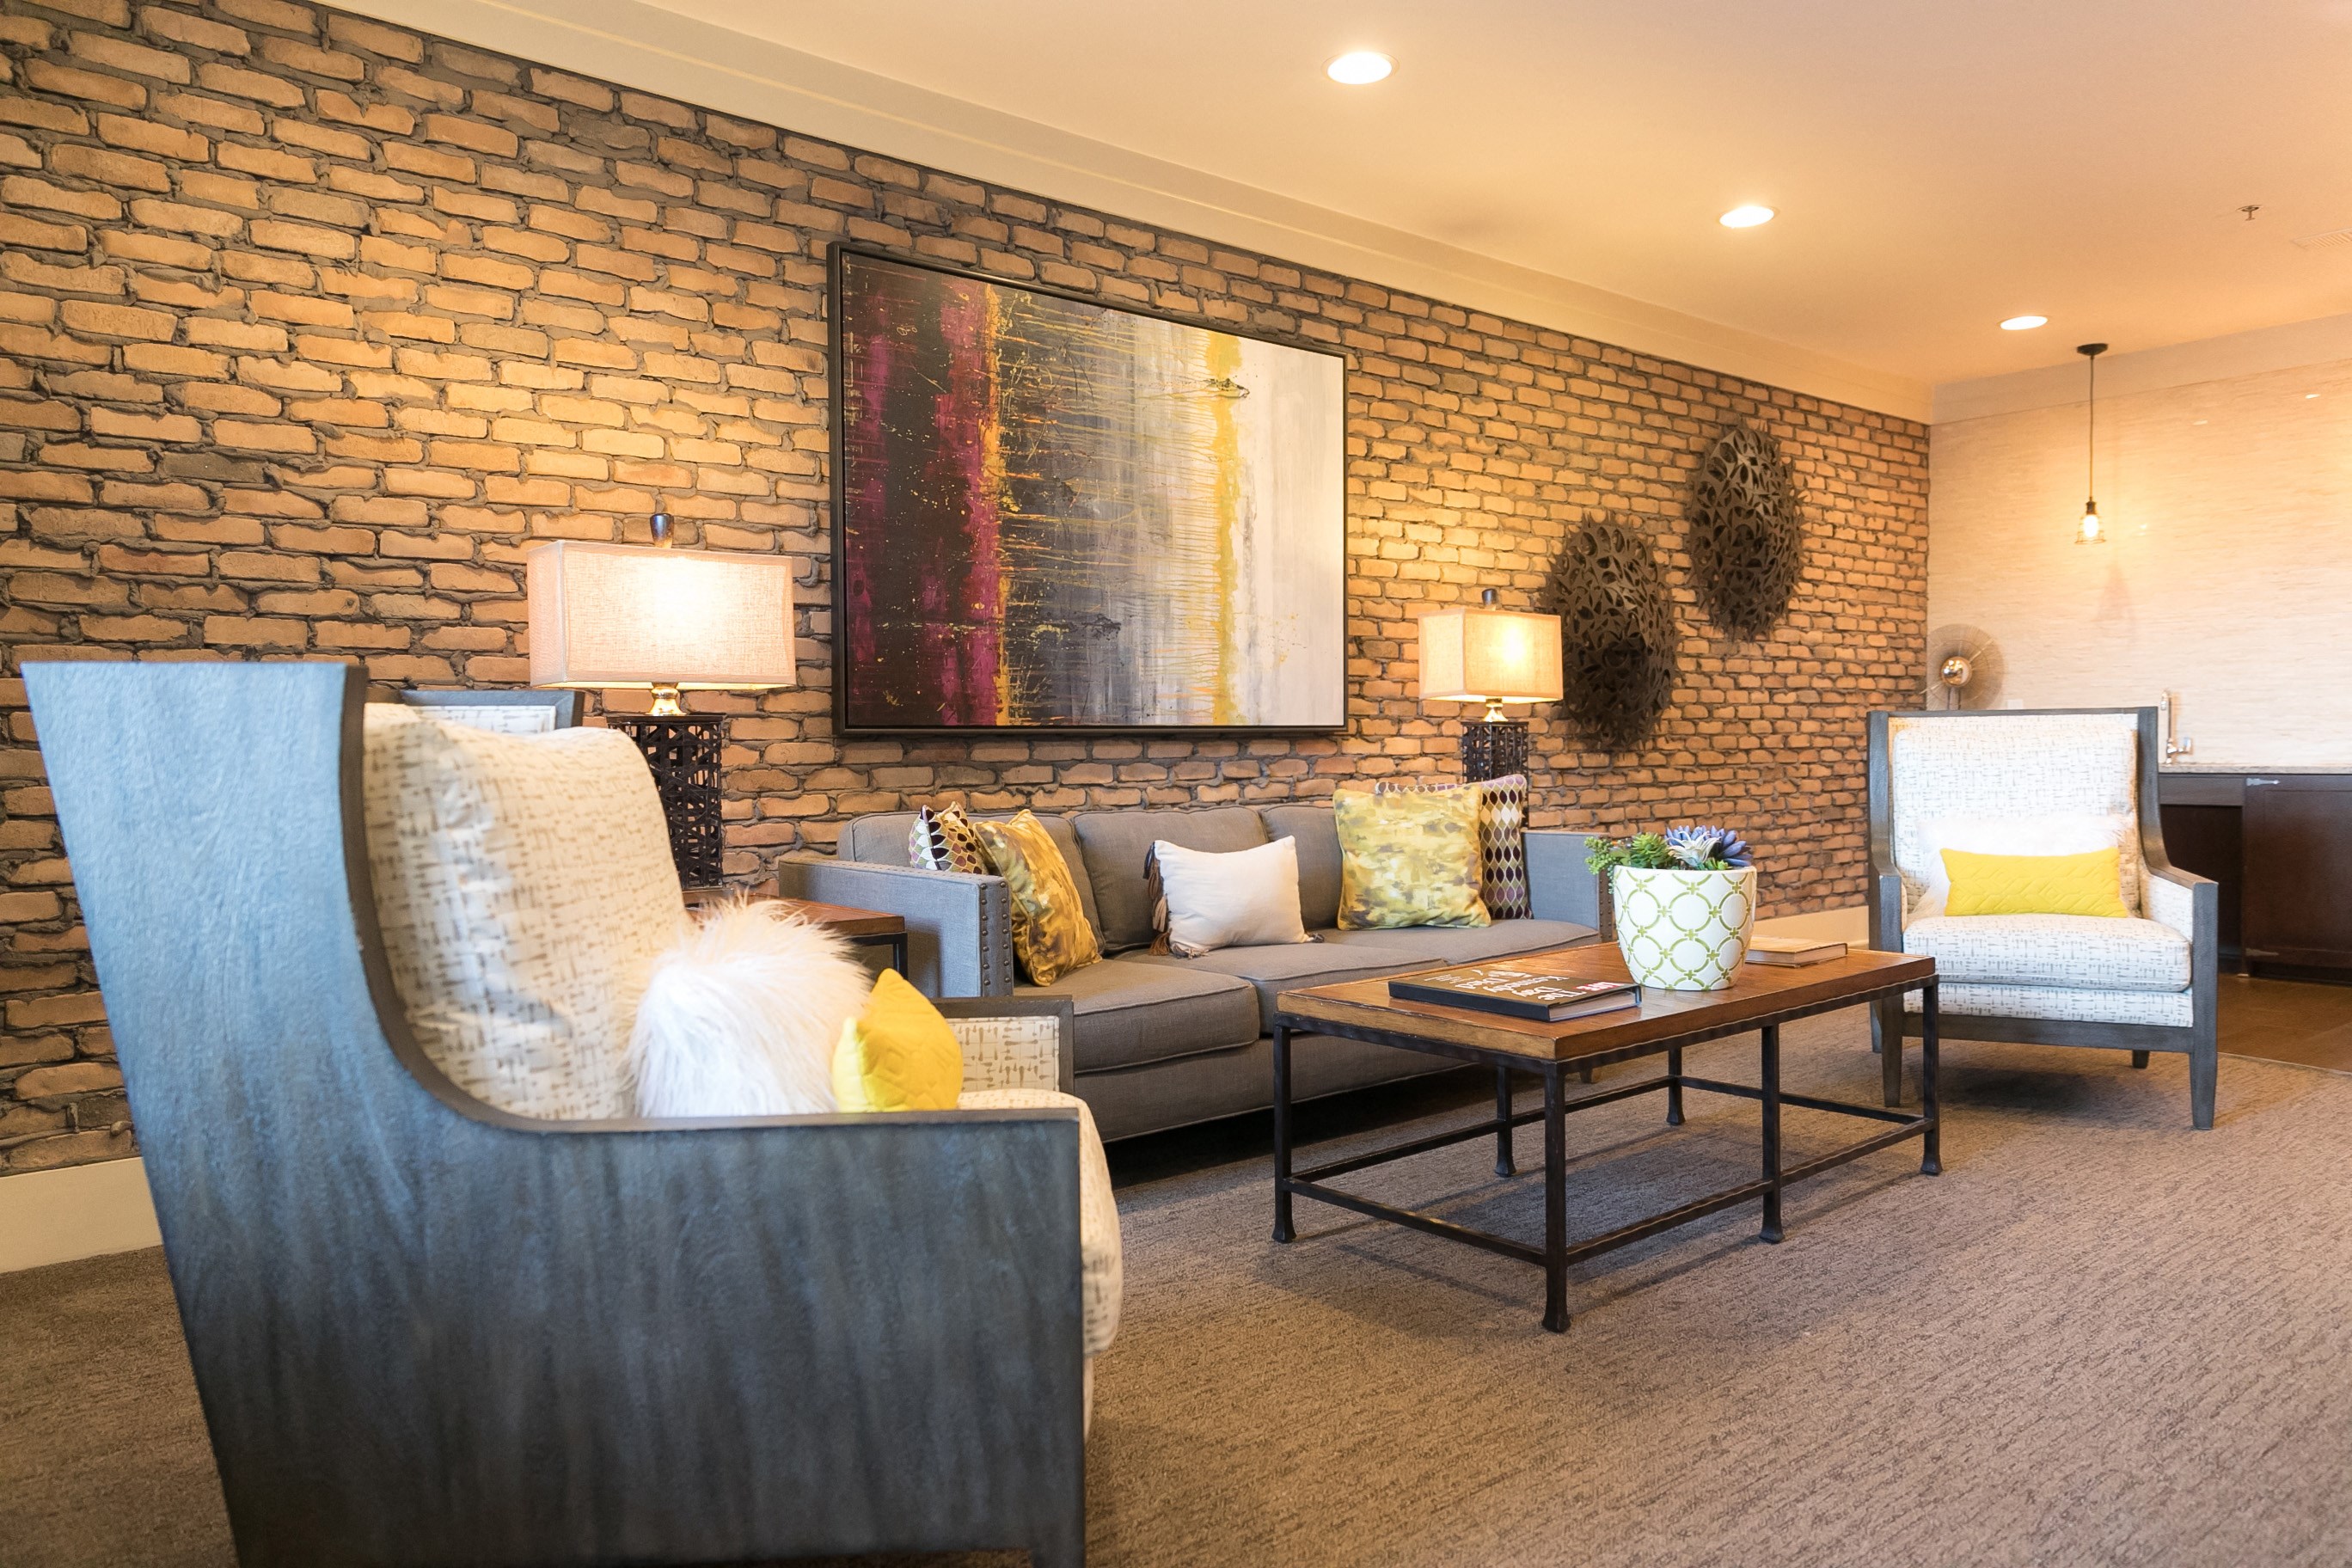 Spacious seating area in a community lounge for residents.